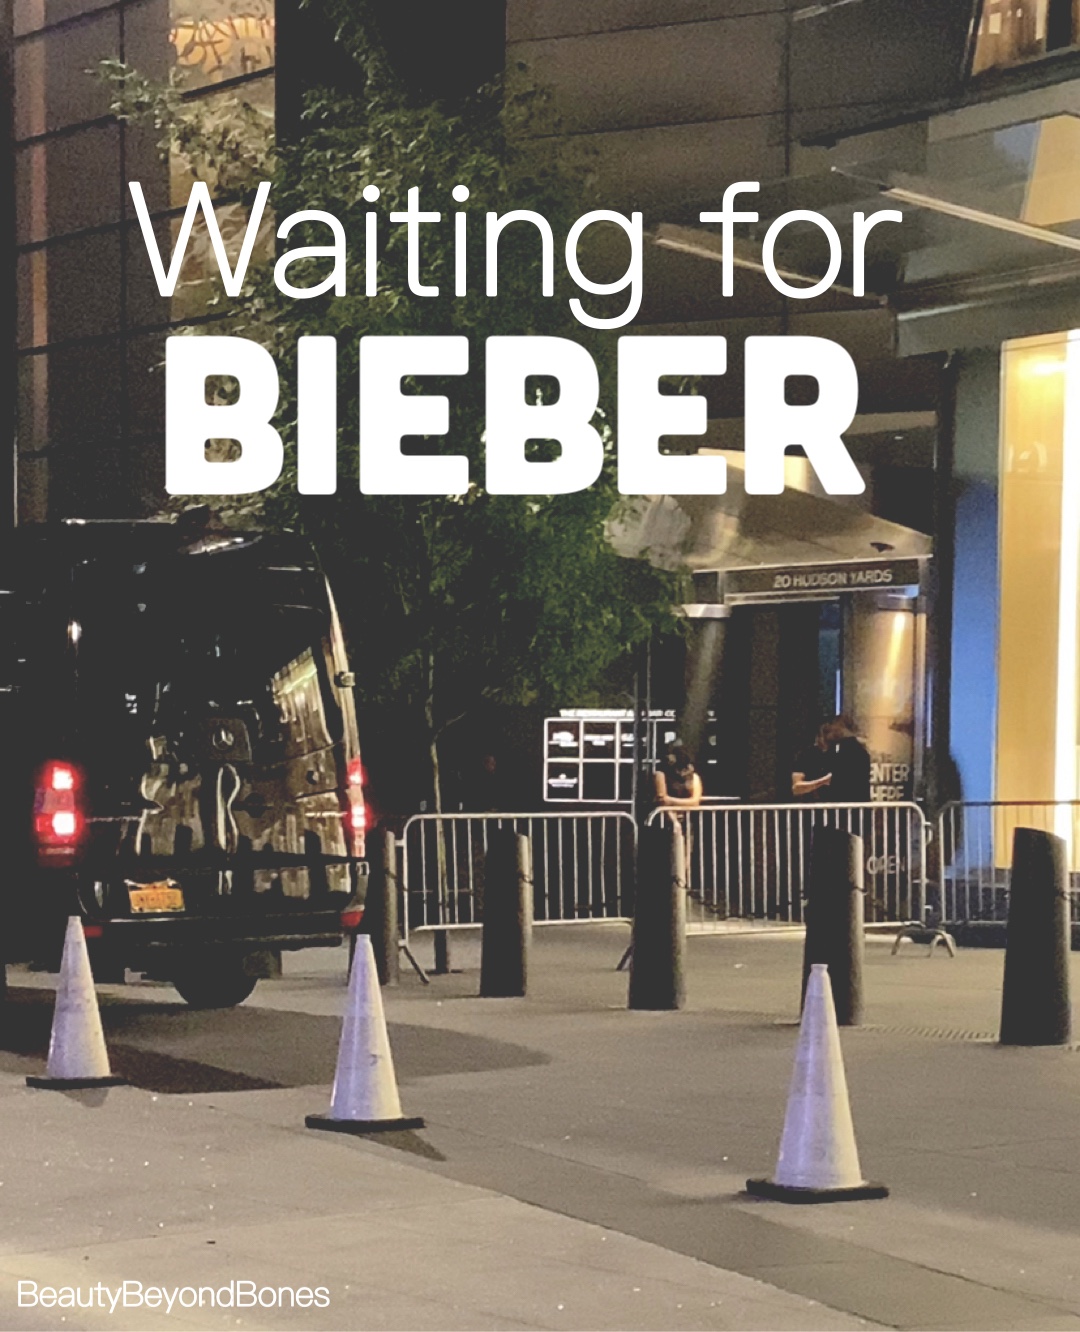 Waiting for Bieber